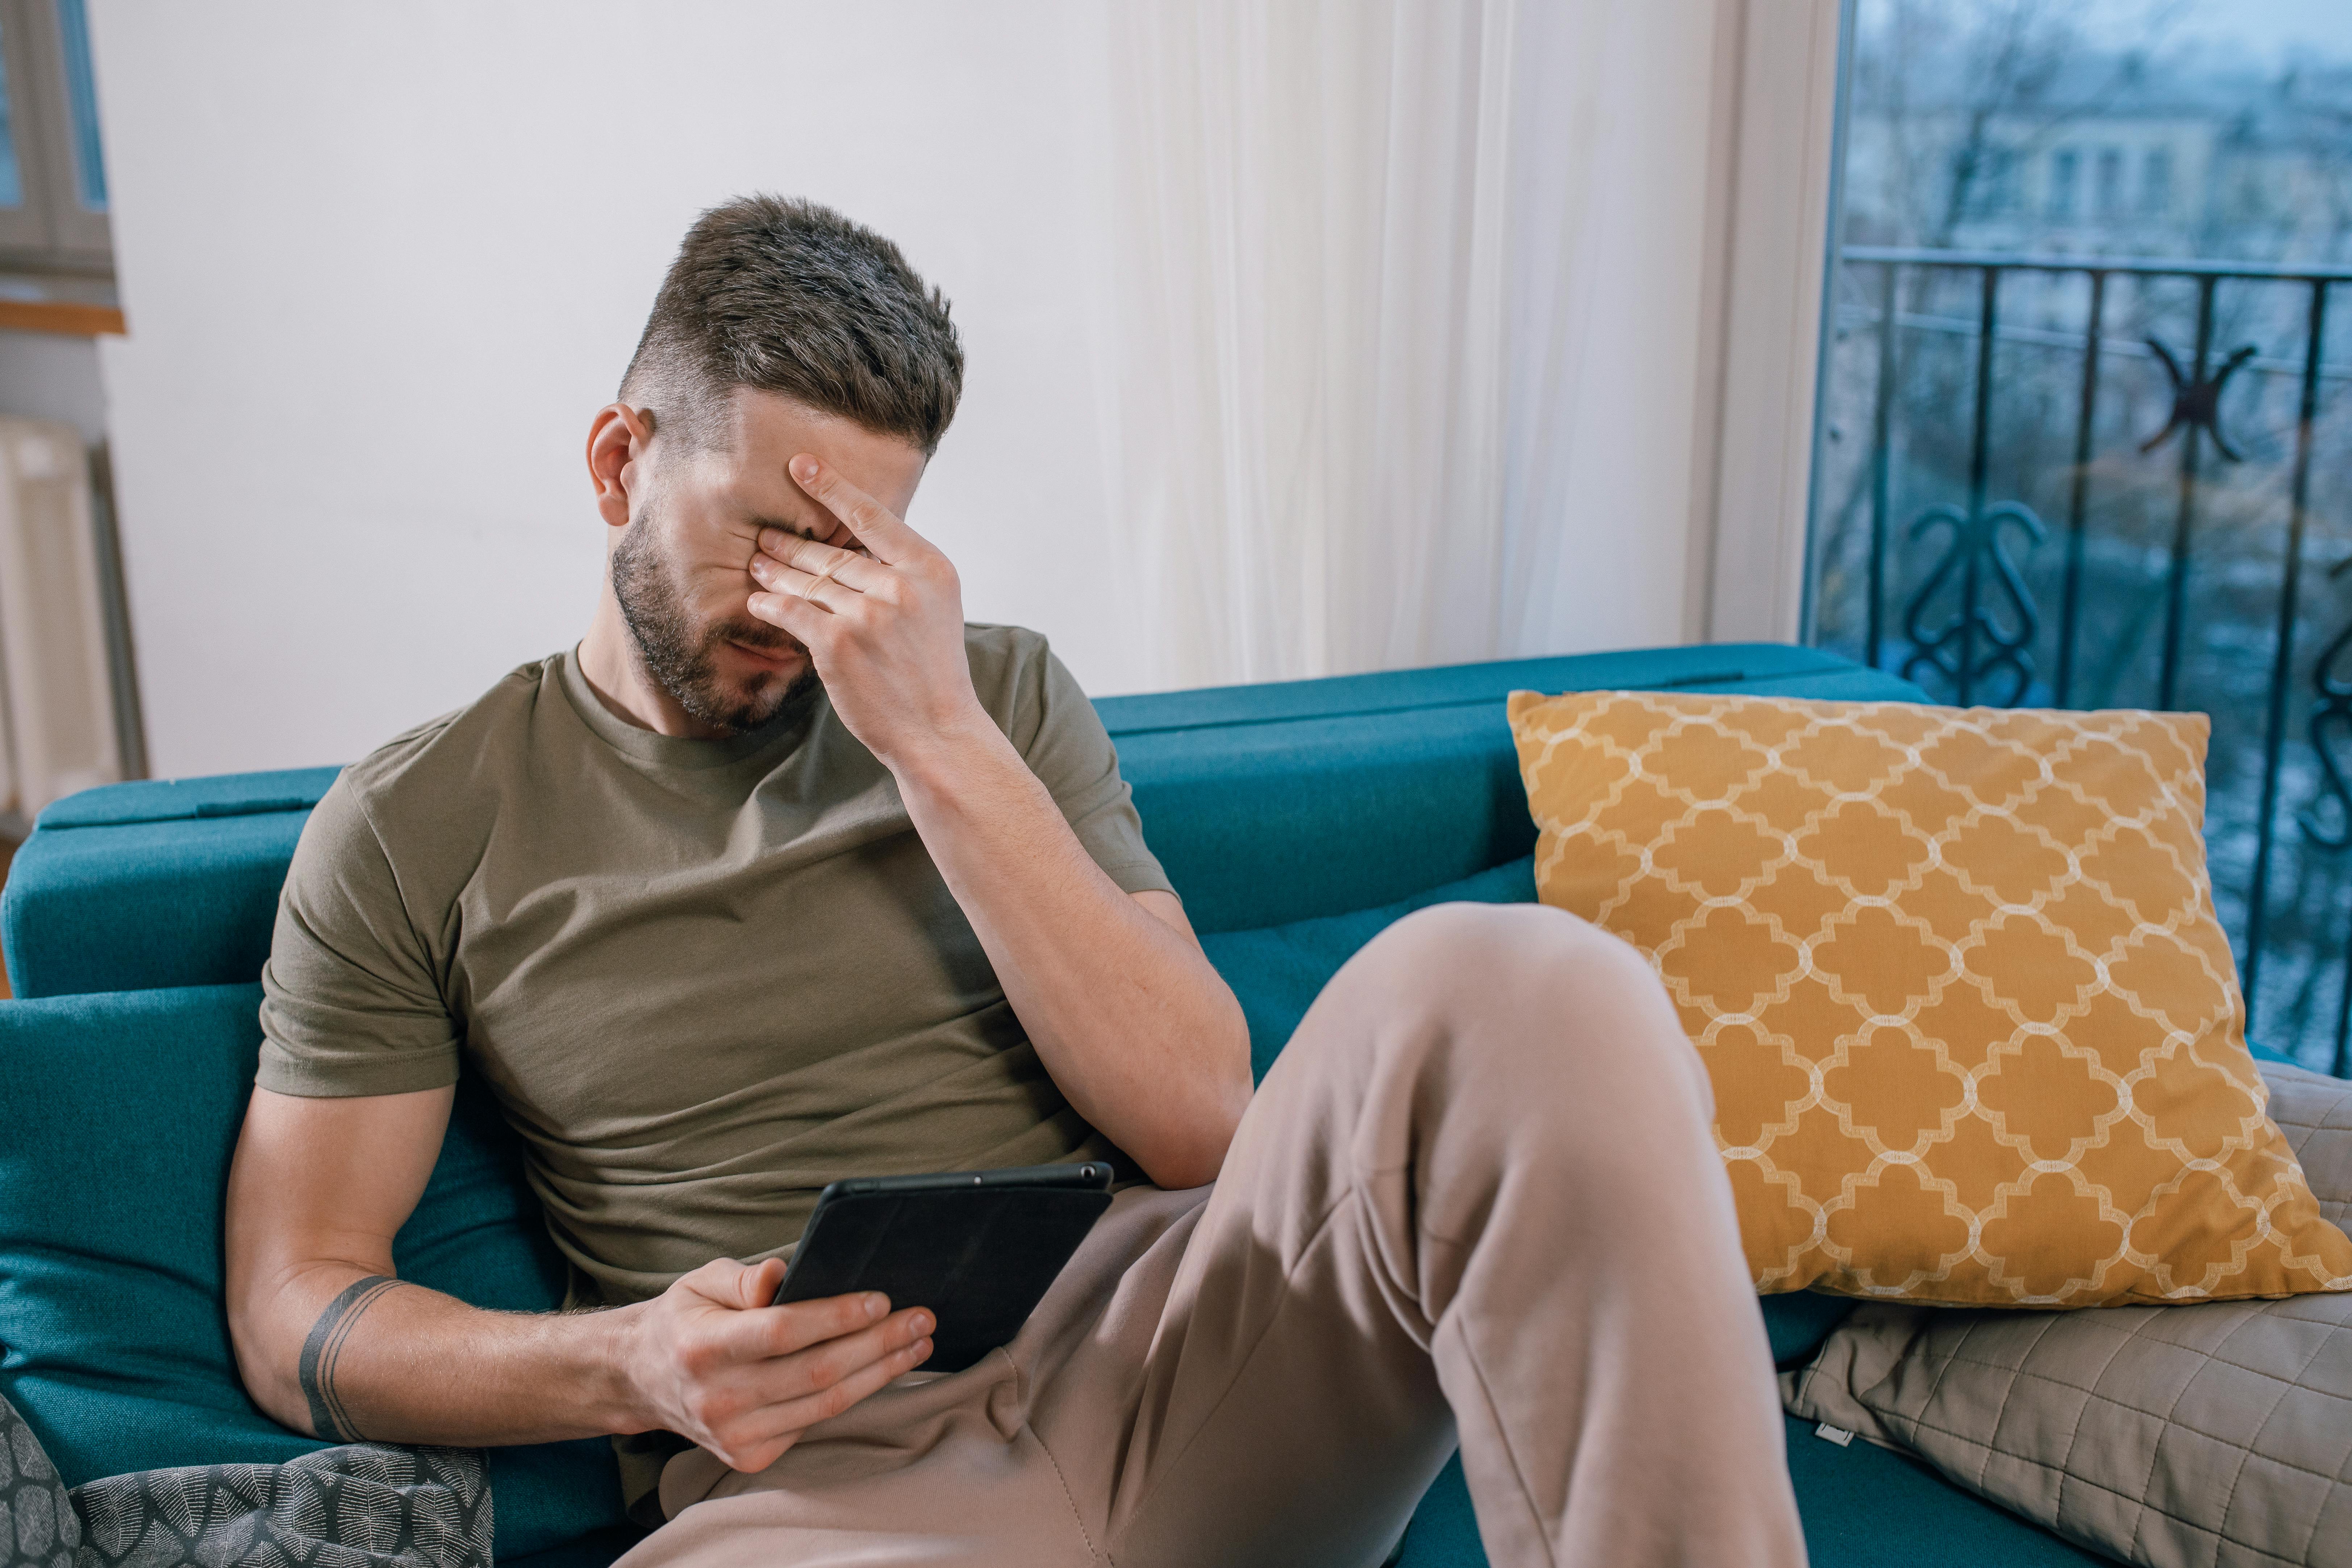 A man crying while sitting and looking at something on a tablet | Source: Pexels